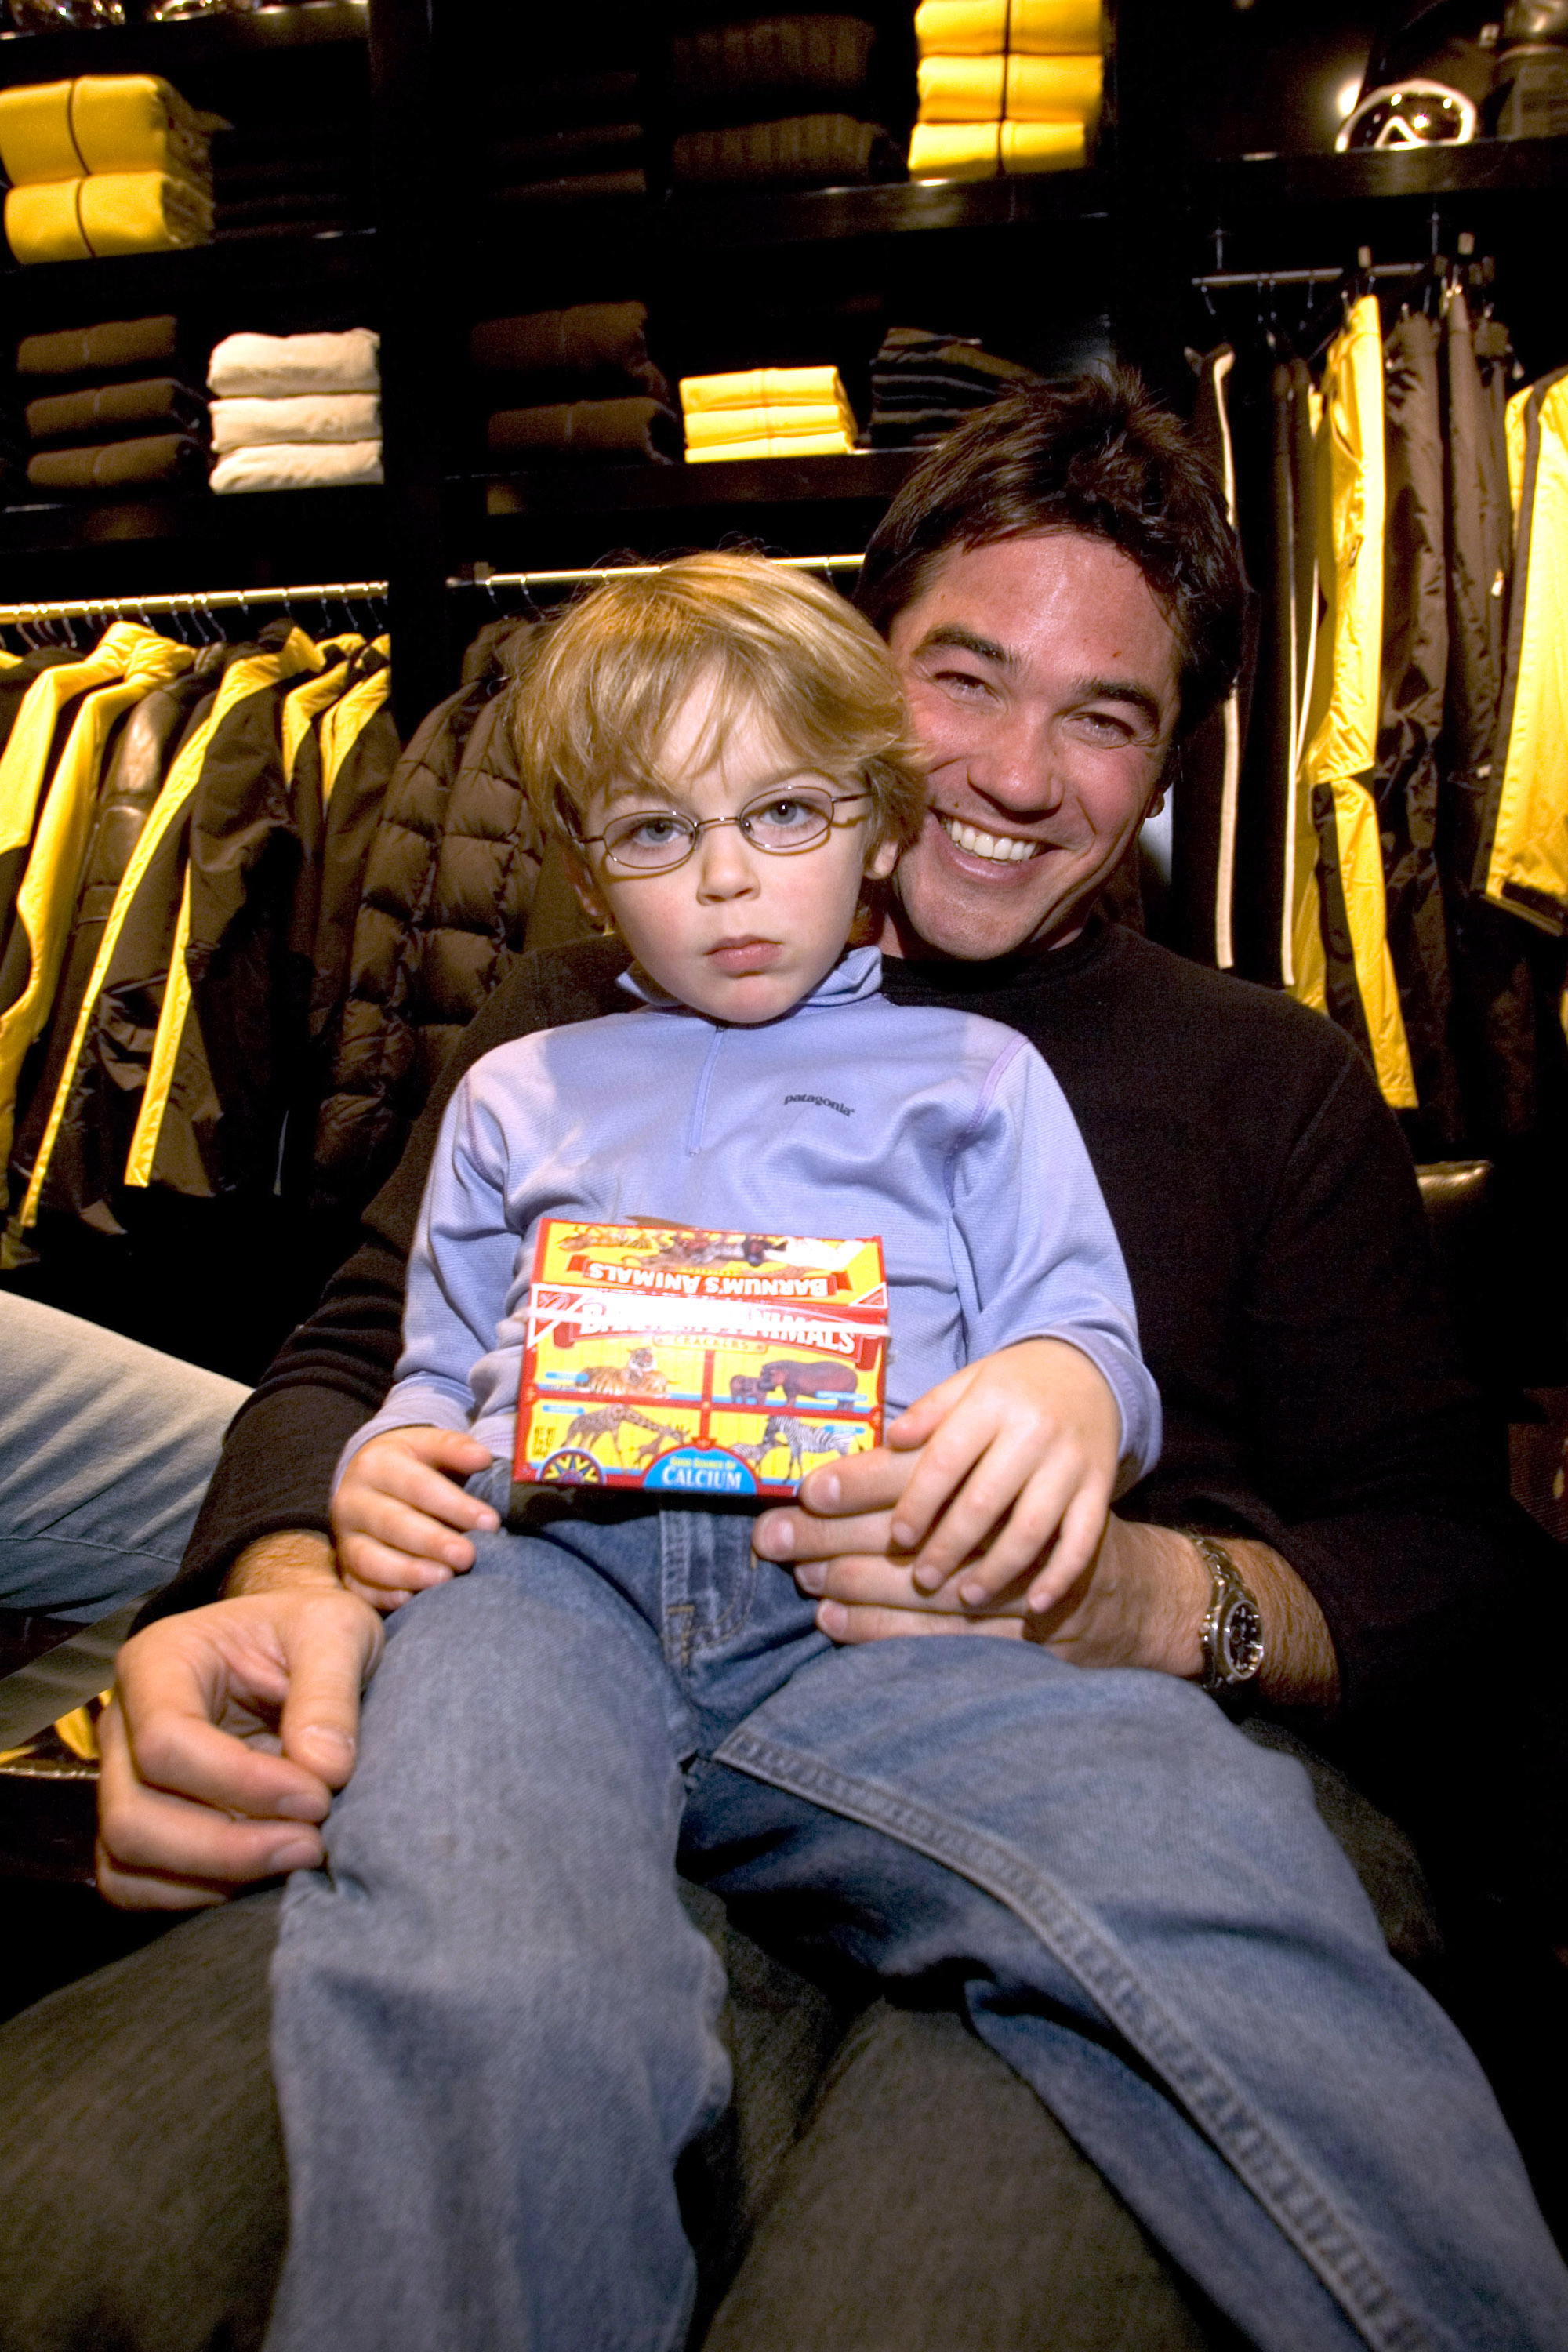 Christopher and Dean Cain during Aspen Peak at the Opening of The New Ralph Lauren Aspen Store in Aspen, Colorado, on December 30, 2004 | Source: Getty Images